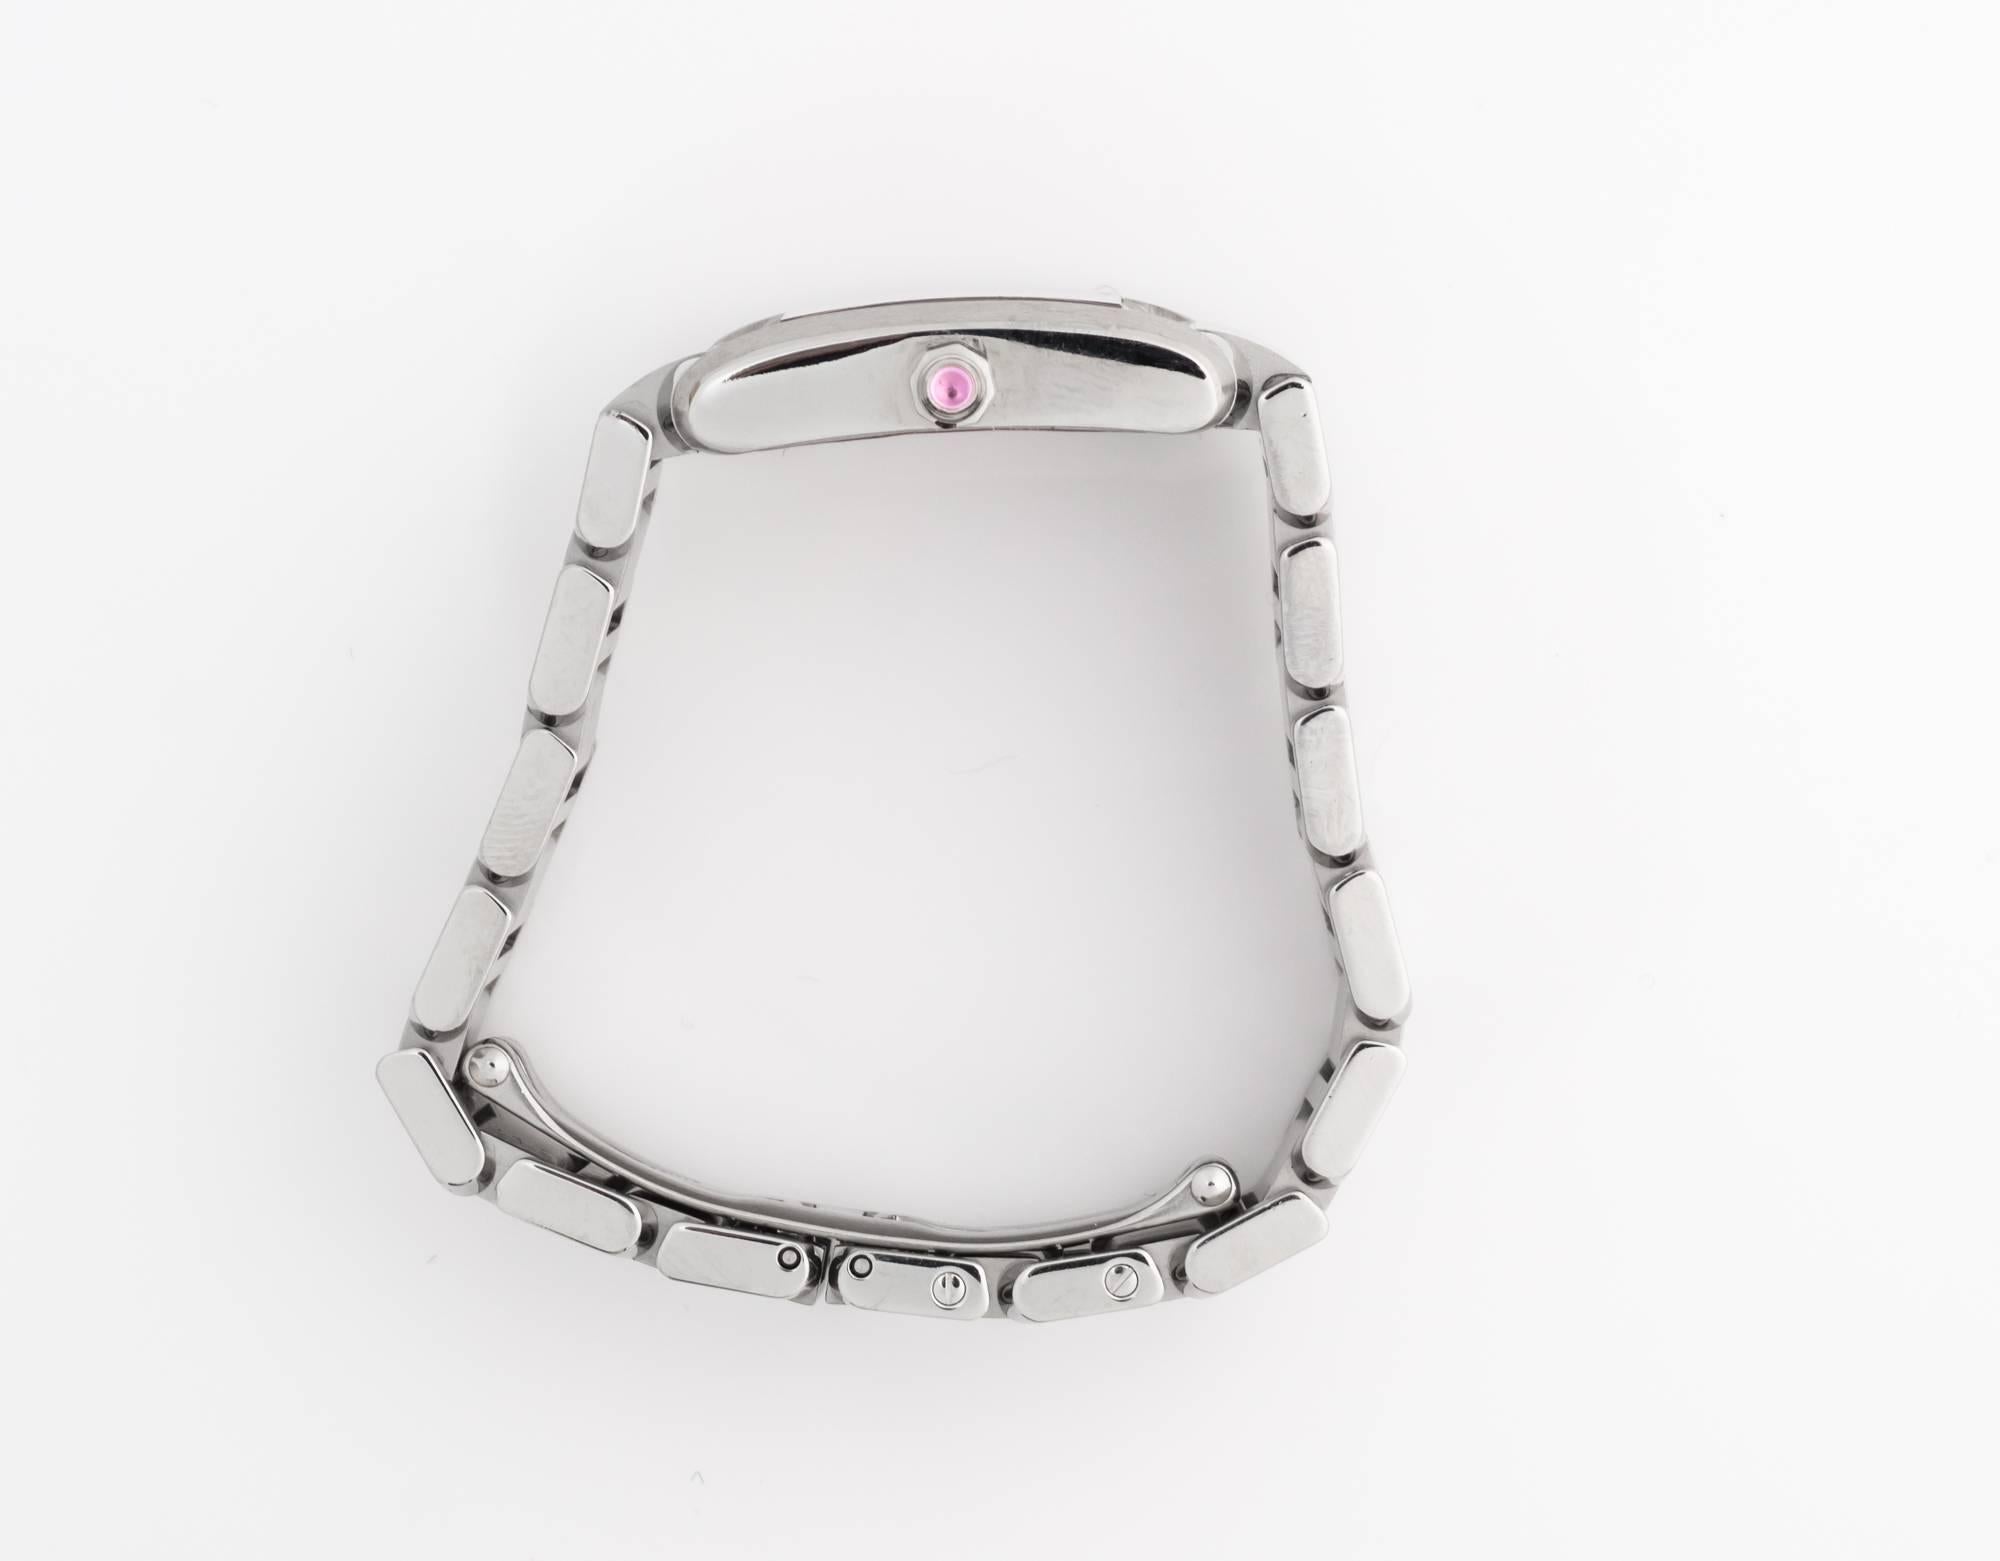 Stainless steel case and bracelet, Amazing Condition. Raspberry dial with steel-tone hands and Roman numeral hour markers. Quartz movement. Steel octagonal crown set with a pink sapphire cabochon. Scratch resistant sapphire crystal. Deployment